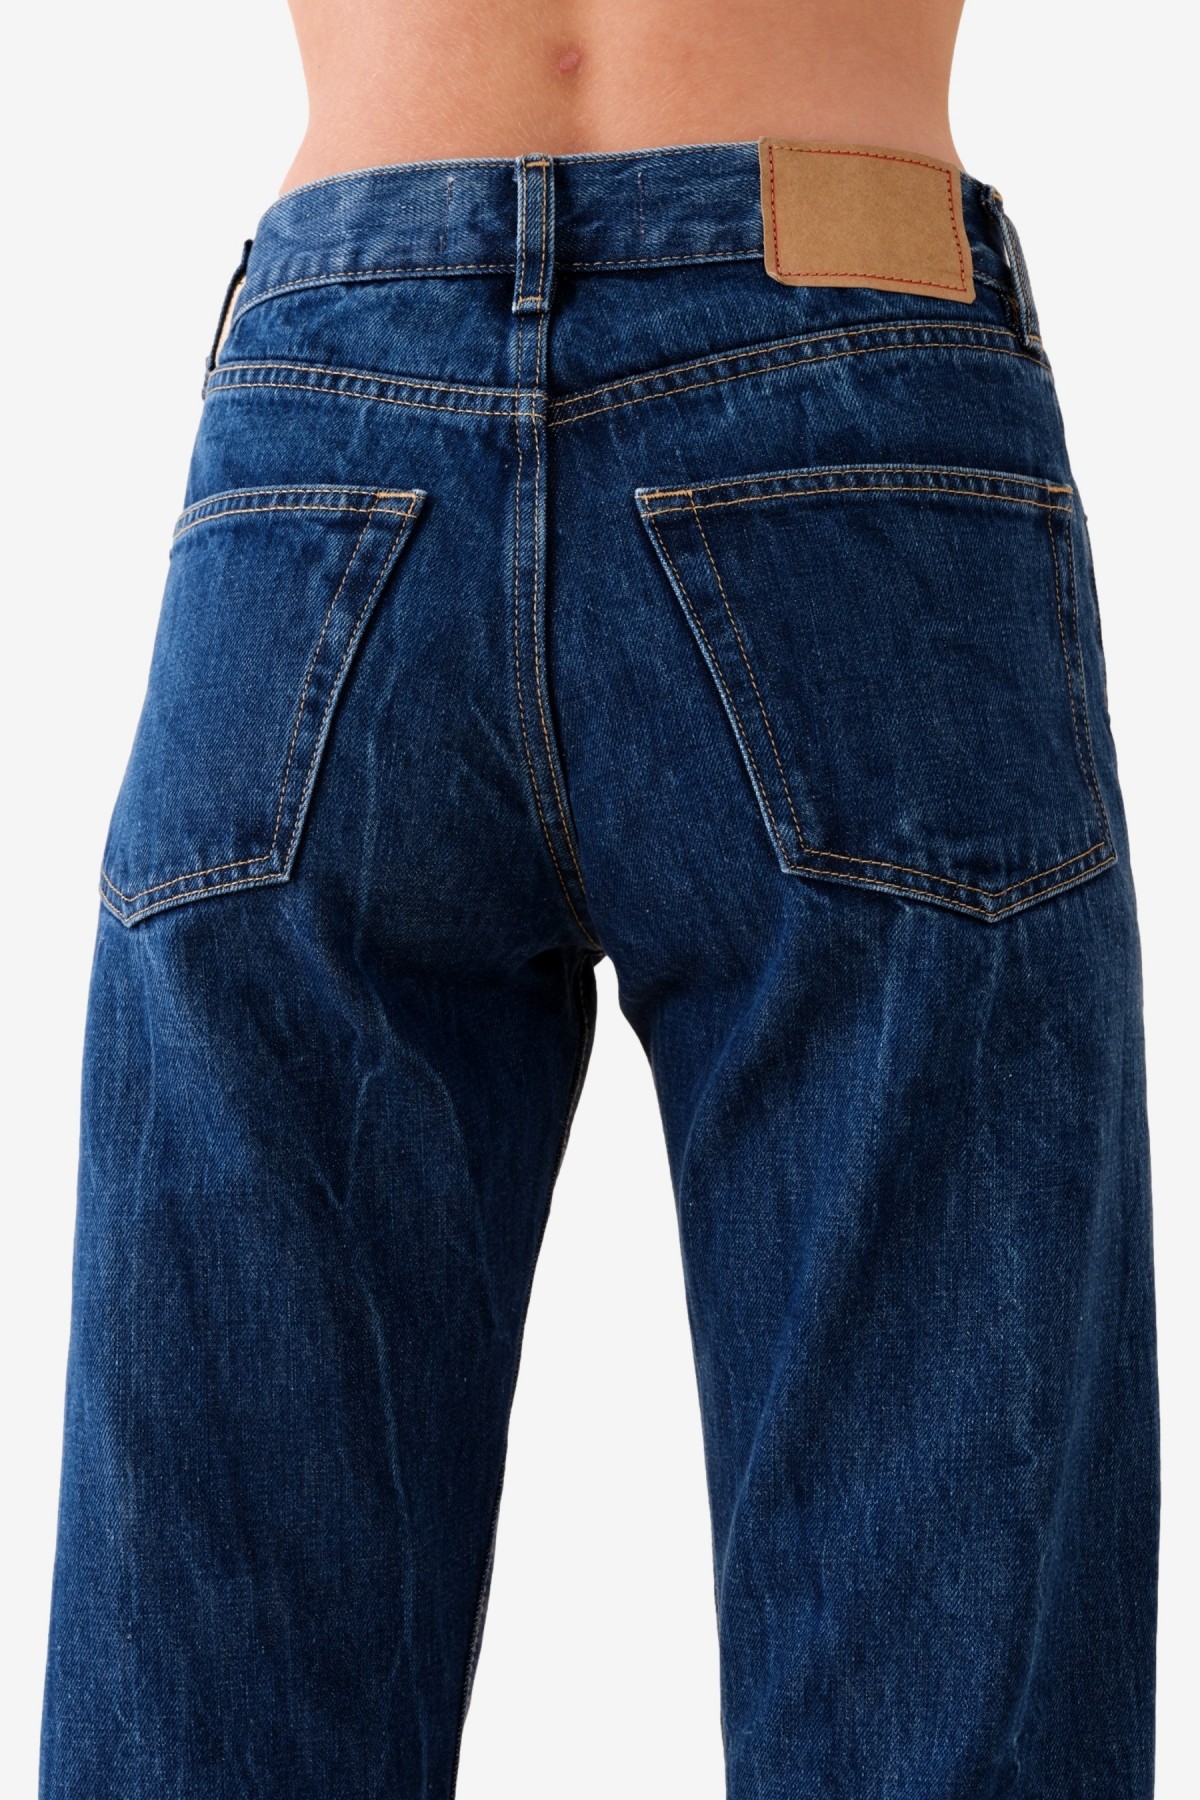 Jeanerica RW005 Rodeo Jeans in Blue Vein